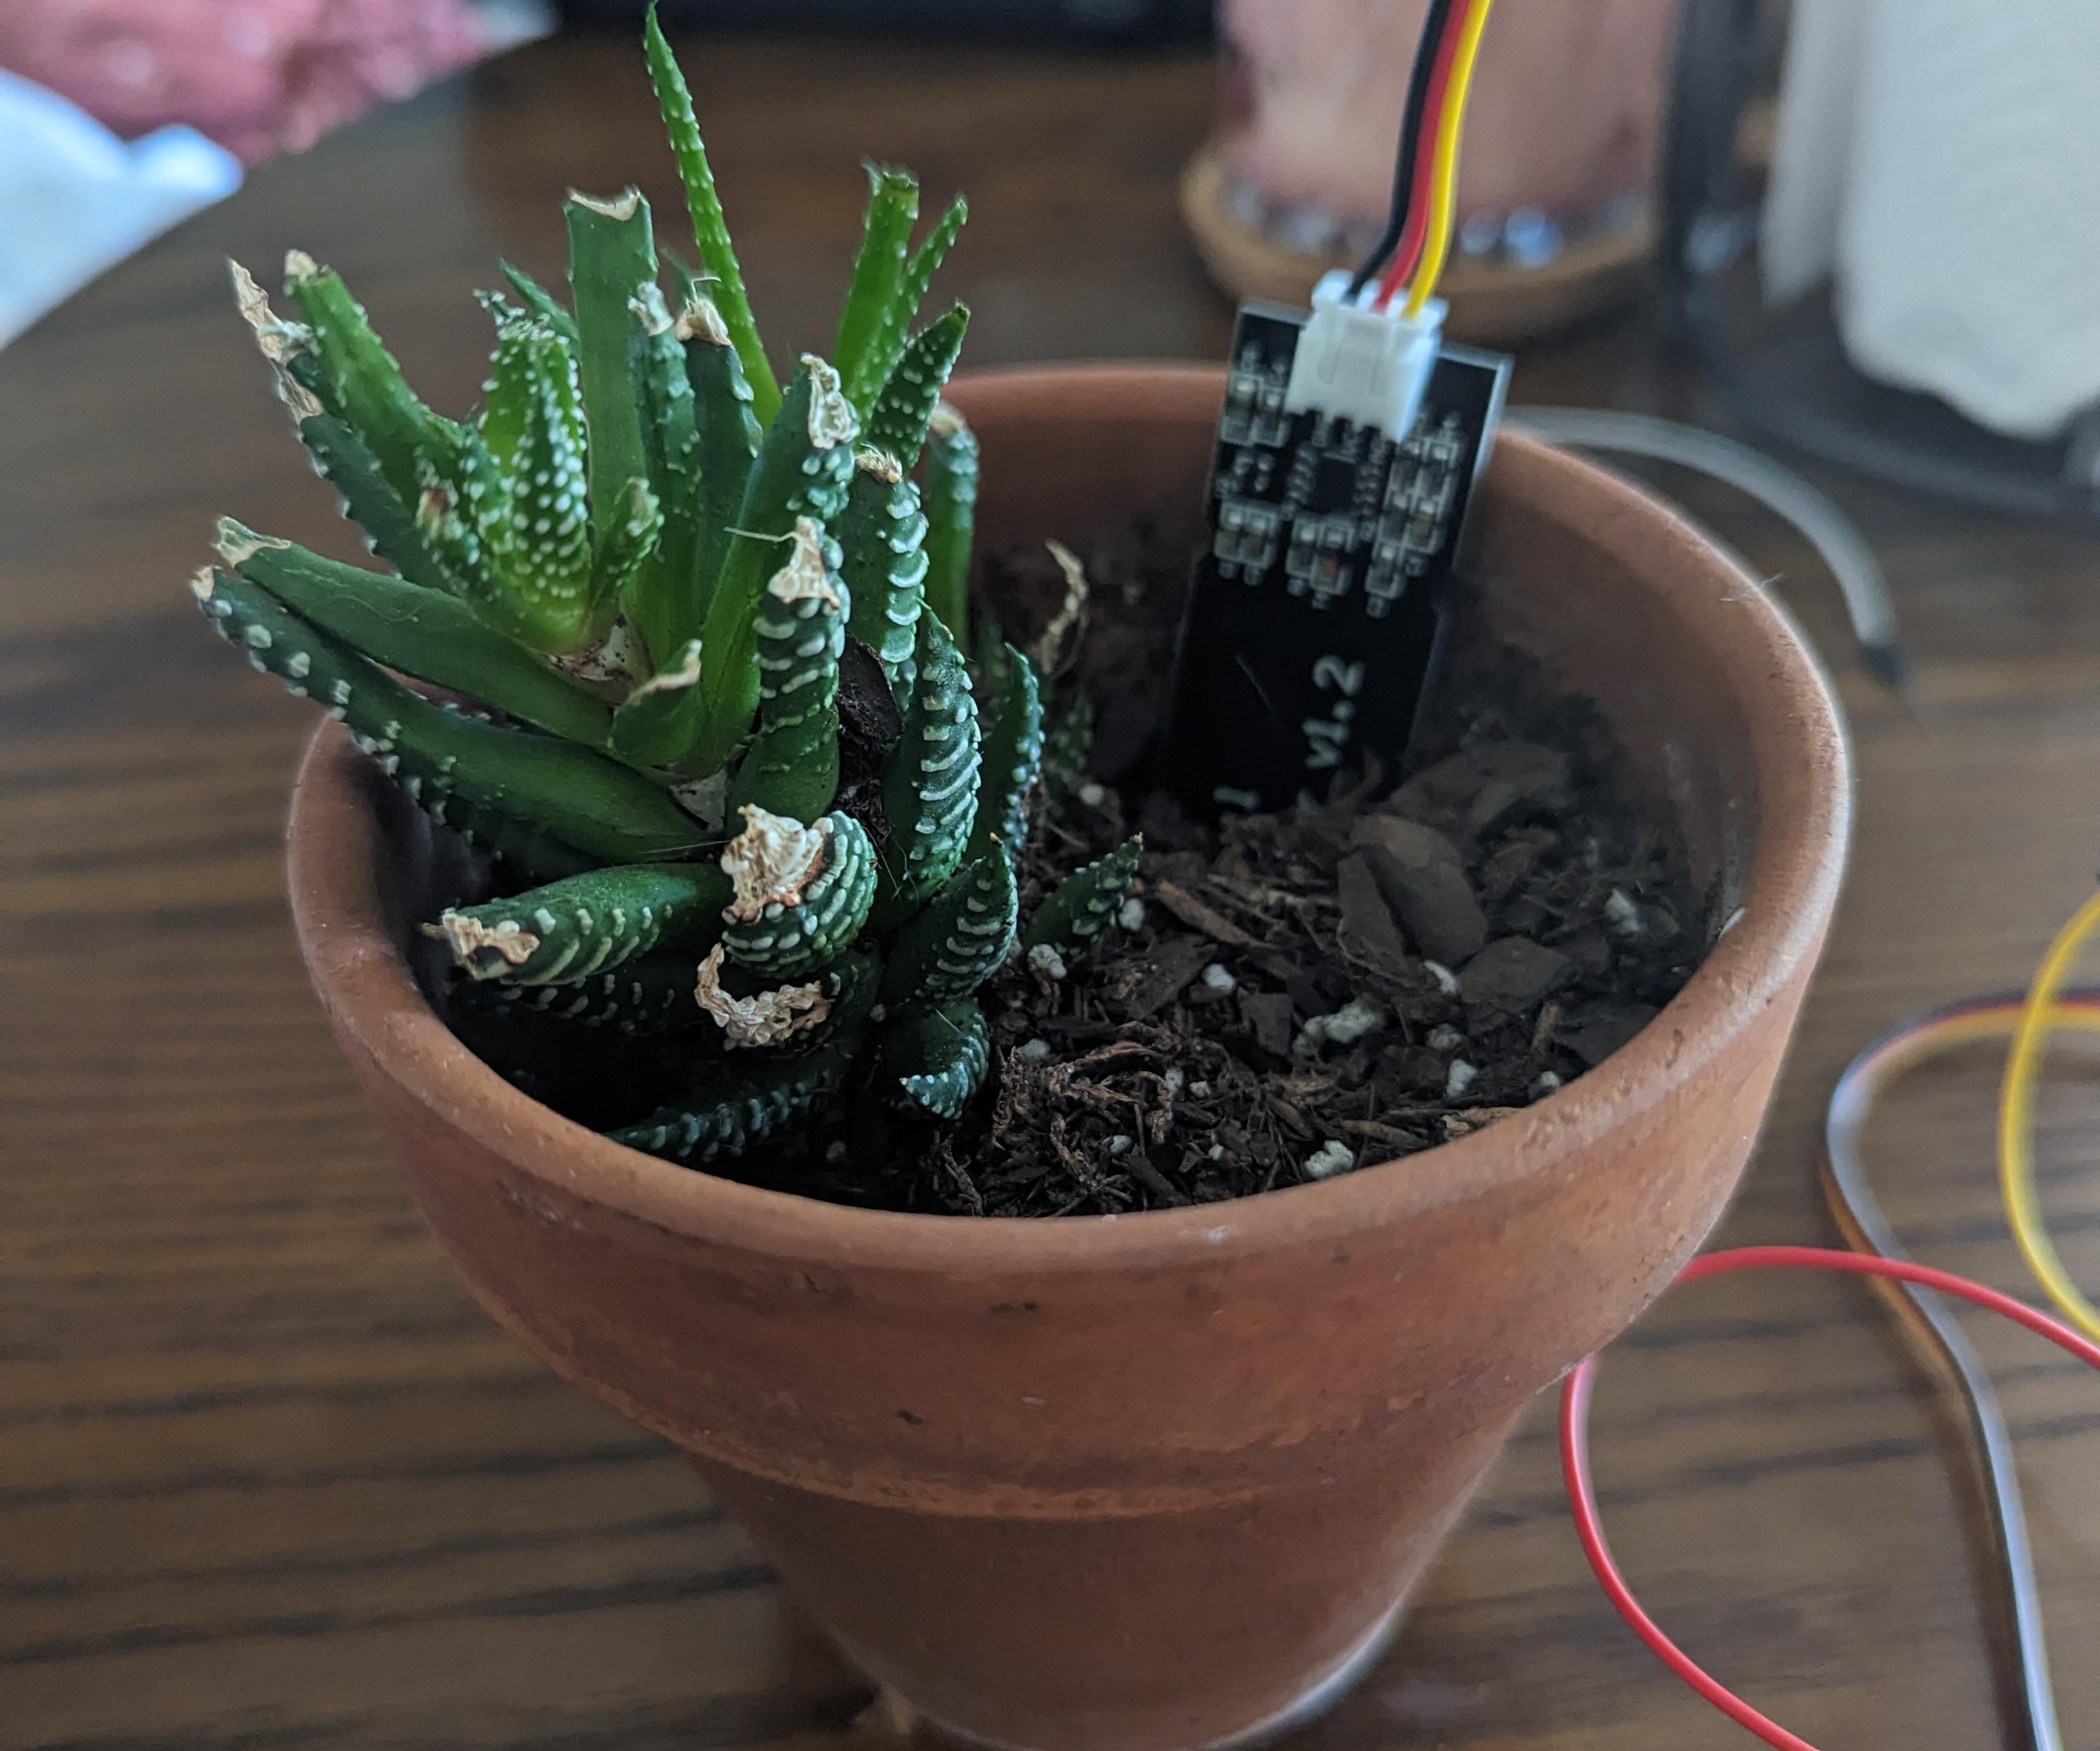 Display Plant Moisture Using a ESP32 and a LCD